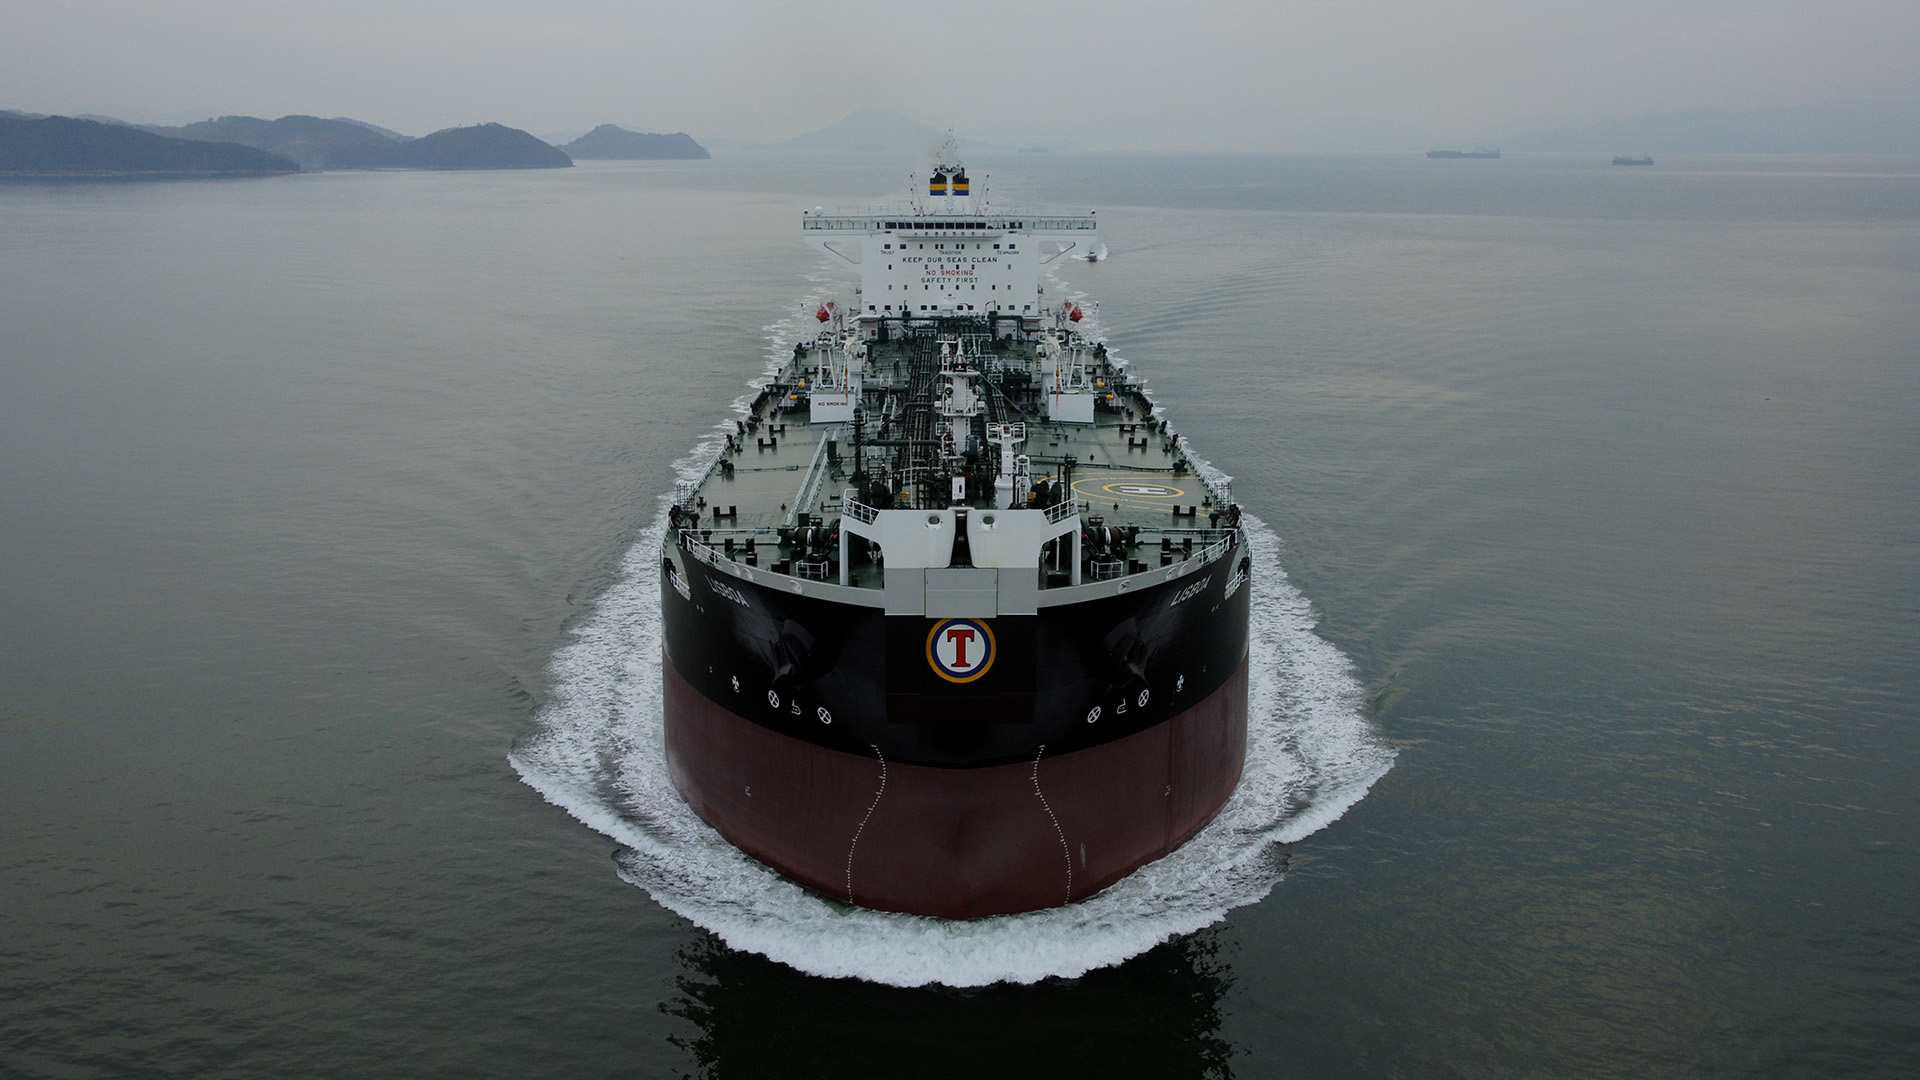 TEN Ltd. Announces 24-Month Charter for Two Panamax Tankers